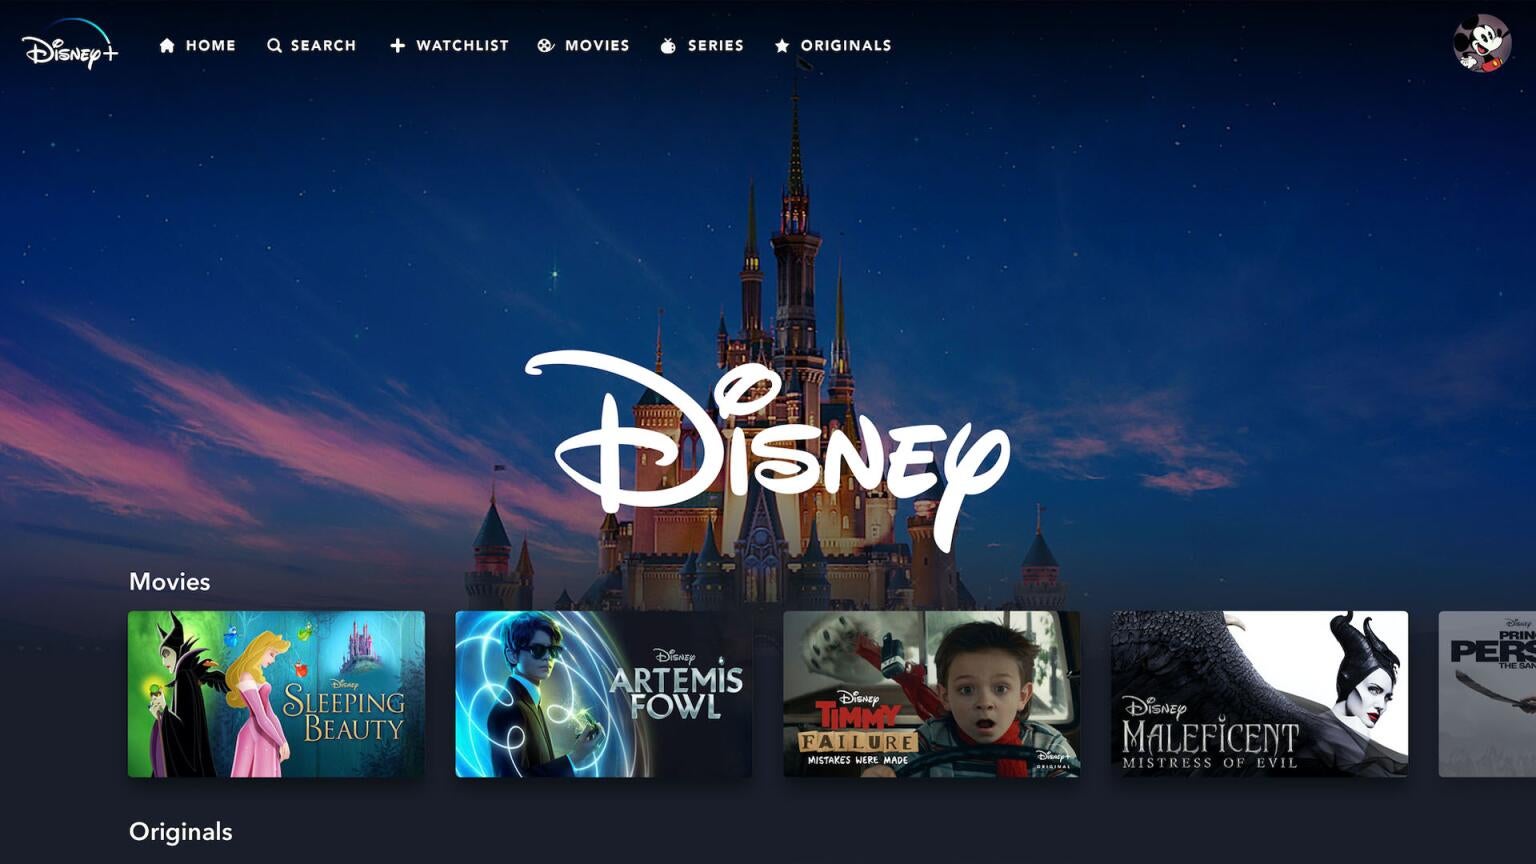 The Disney+ user interface is getting some brand new ads for viewers who use the streamer's Basic plan.